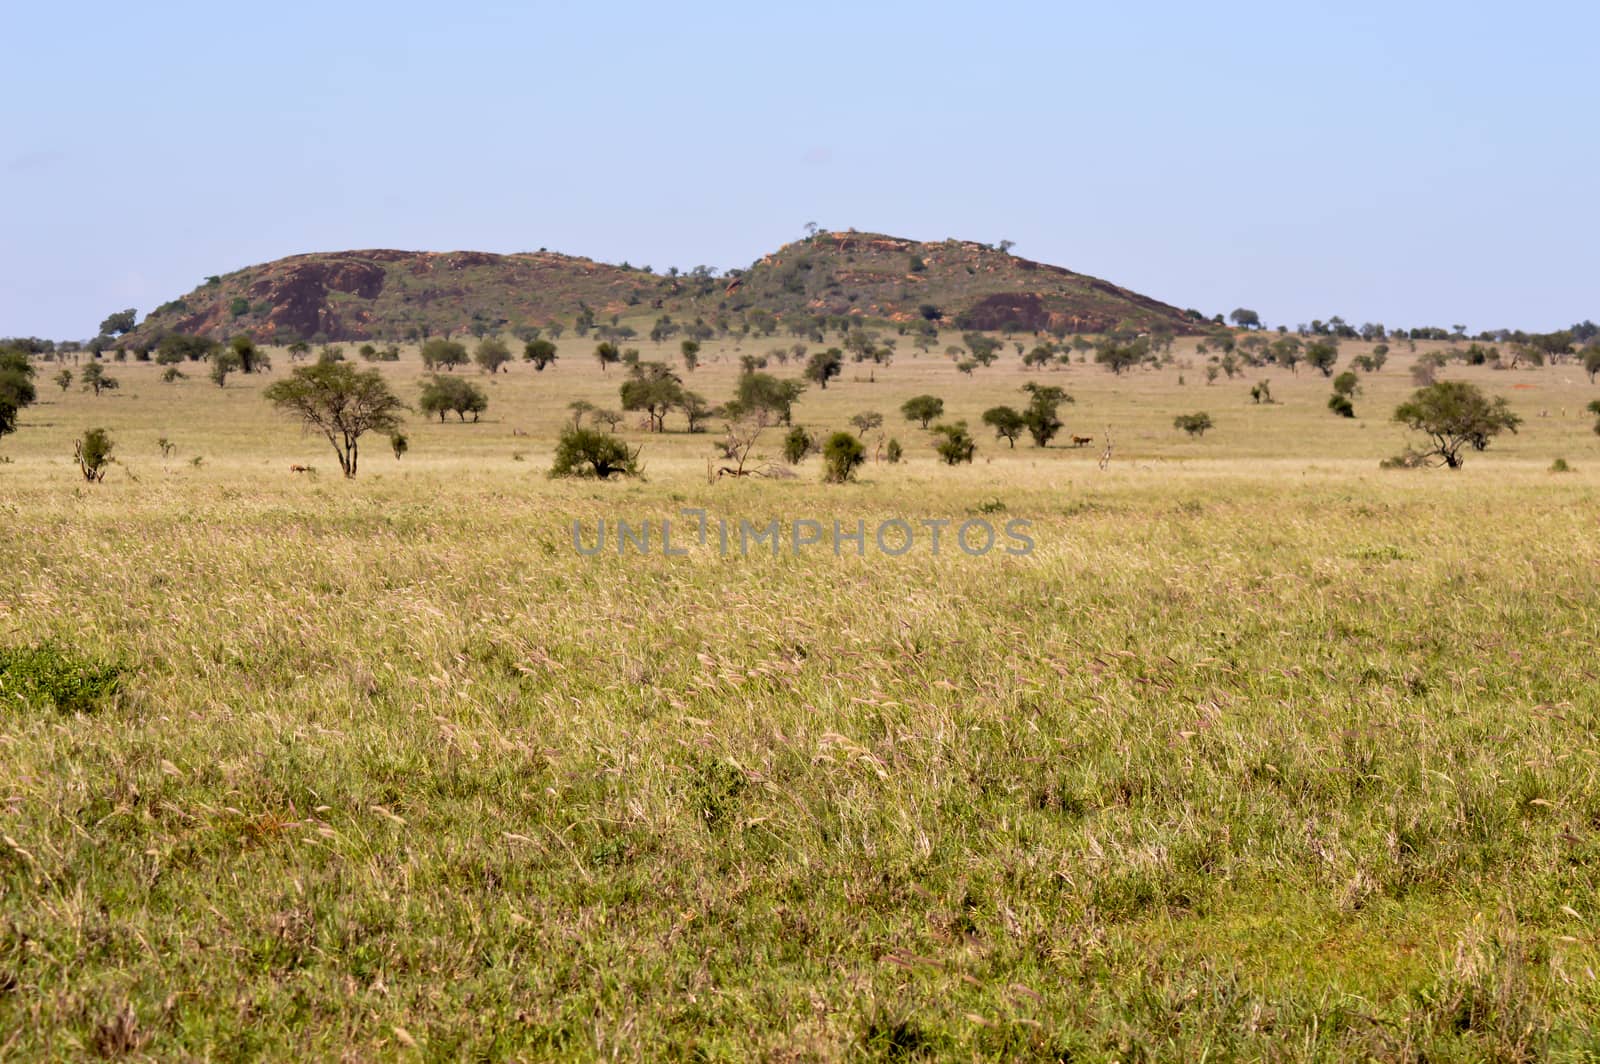 View of the Tsavo East savannah in Kenya with the mountains in the background